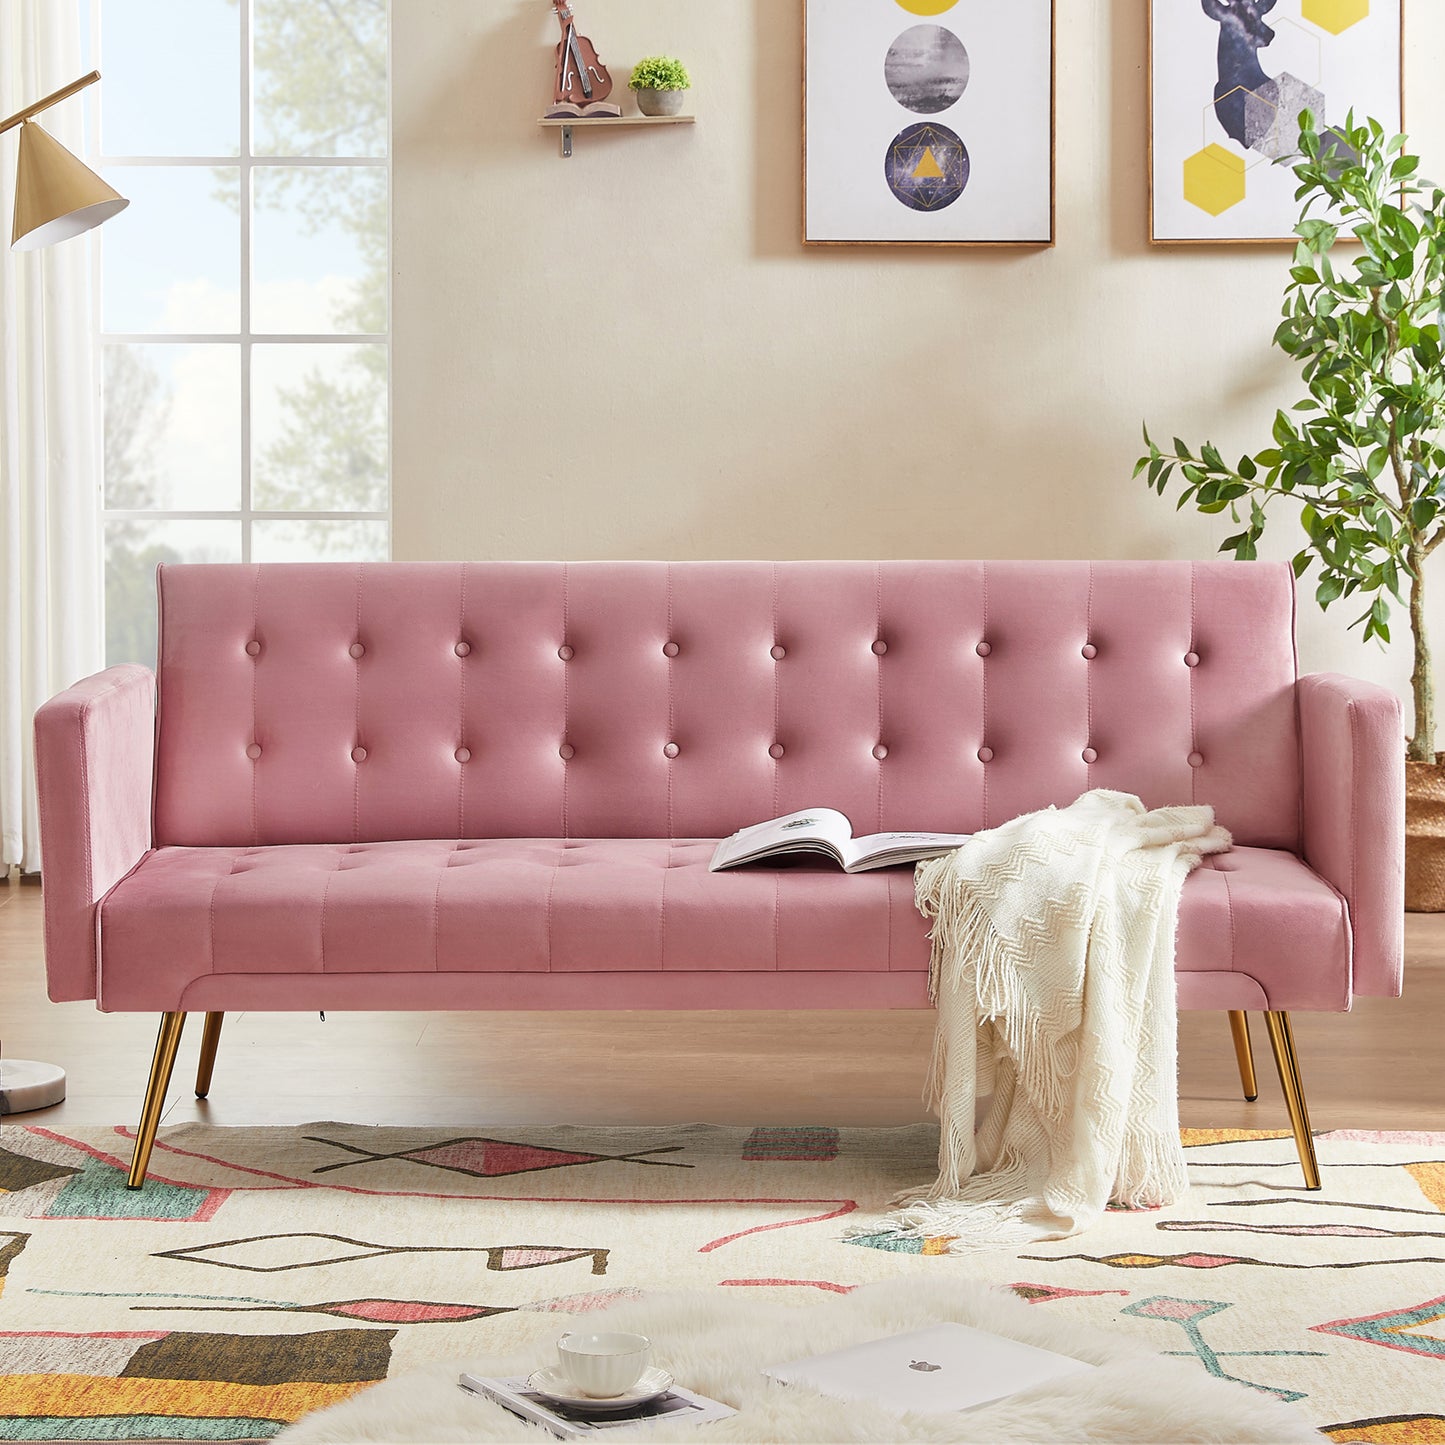 SYNGAR Couches for Living Room, Velvet Upholstered Convertible Sofa Bed with Armrests, Metal Legs, Adjustable Backrest, Mid Century Futon Sofa and Couch for Home Apartment Living Room, Pink